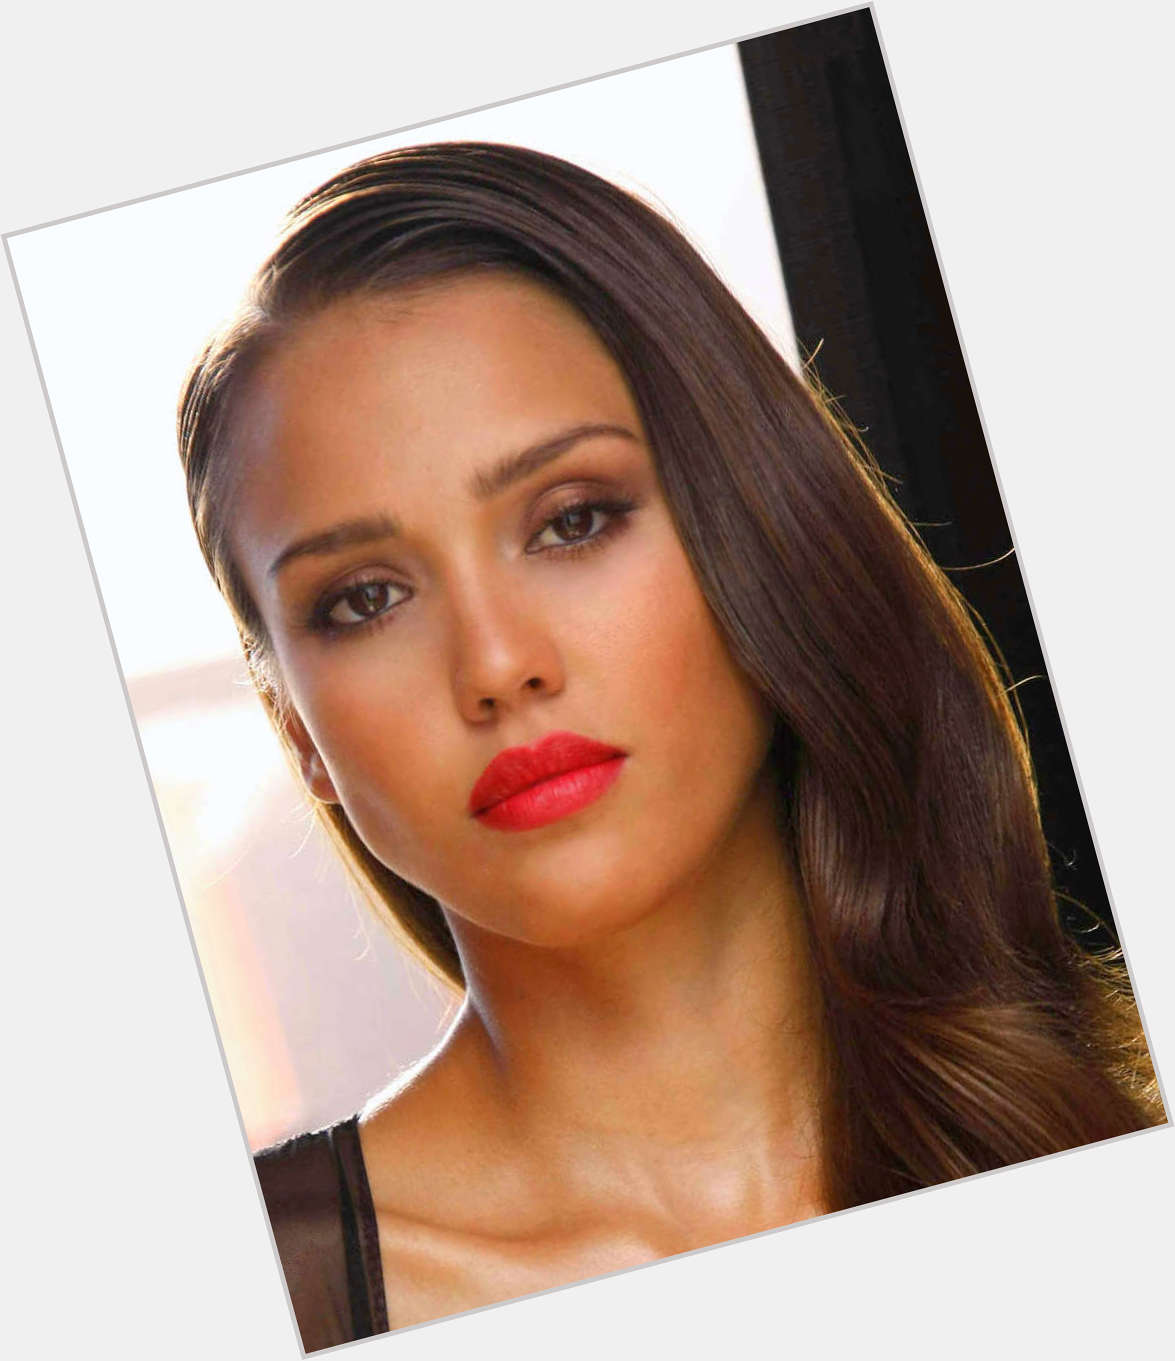 Jessica Alba April 28 Sending Very Happy Birthday Wishes! All the Best!  